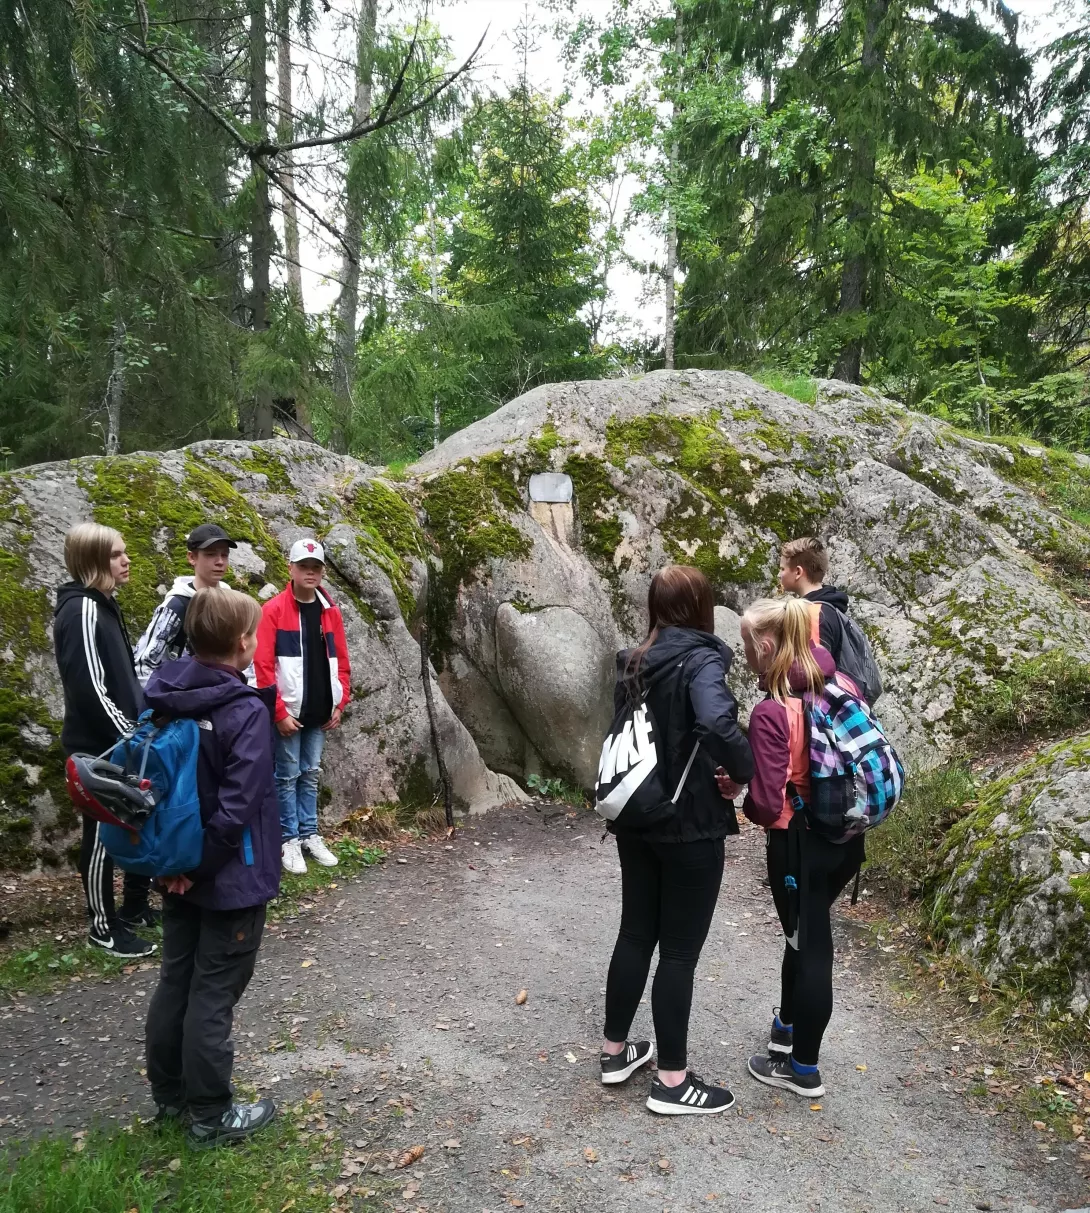 Upper school students in nature. A big stone in the background.